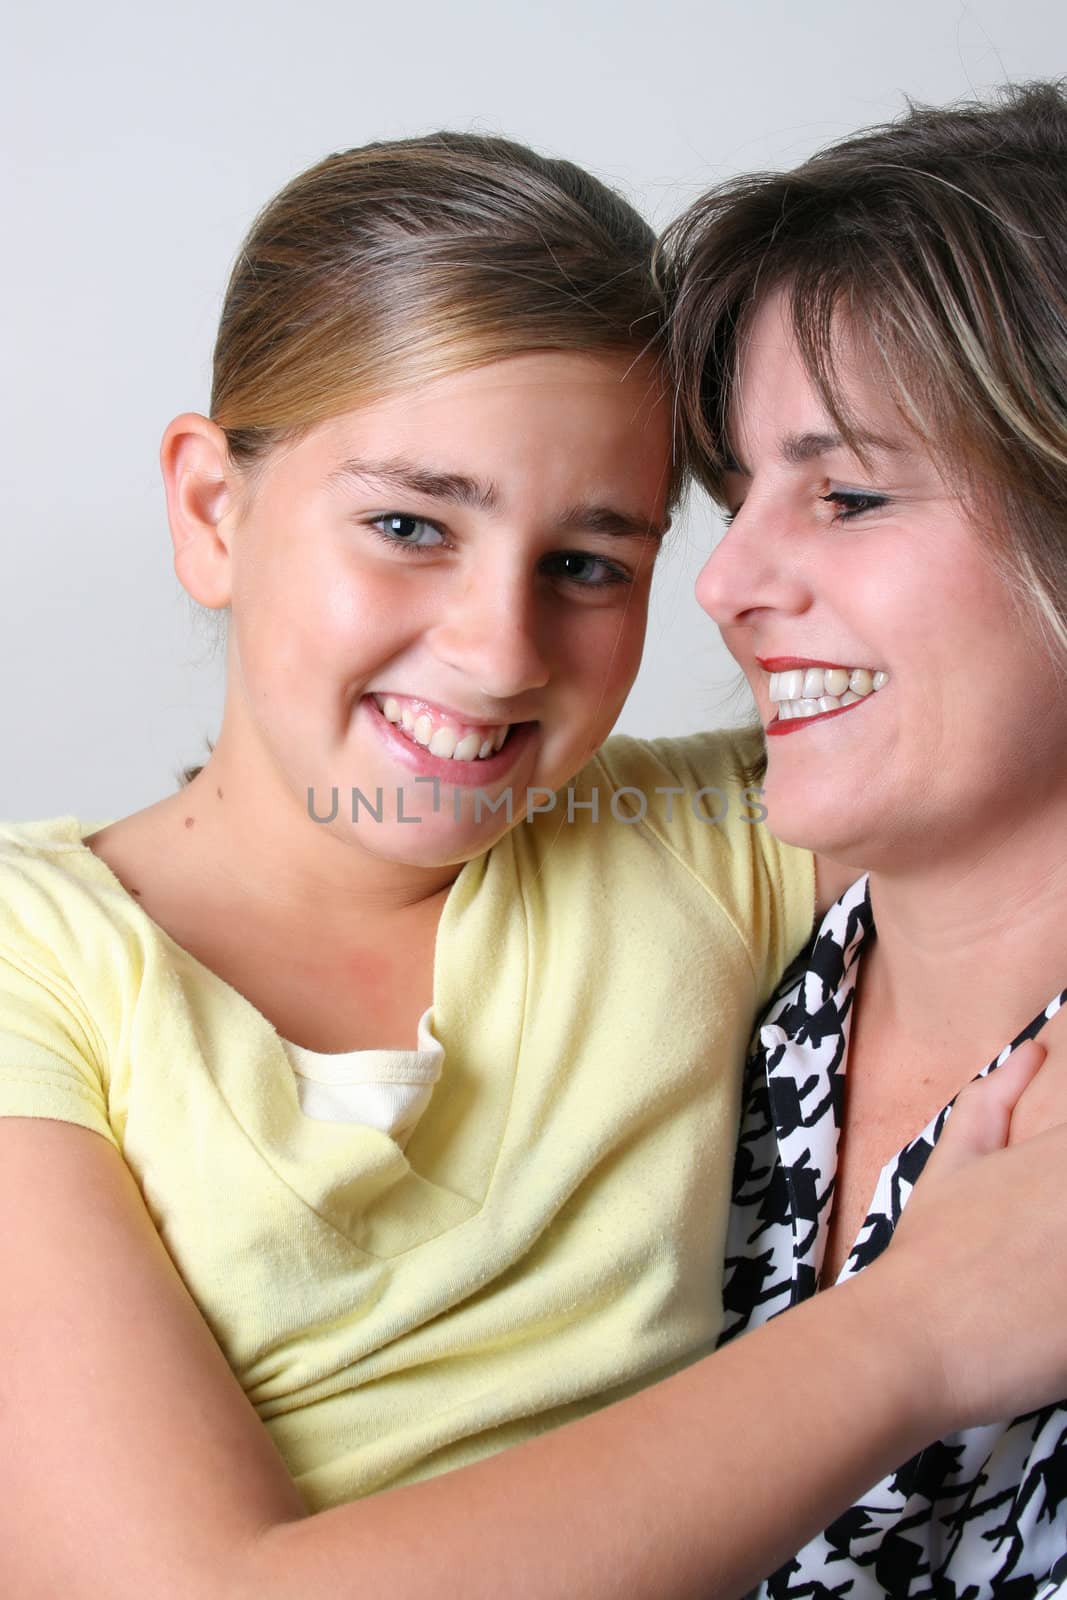 Beautiful mother and daughter on a white background